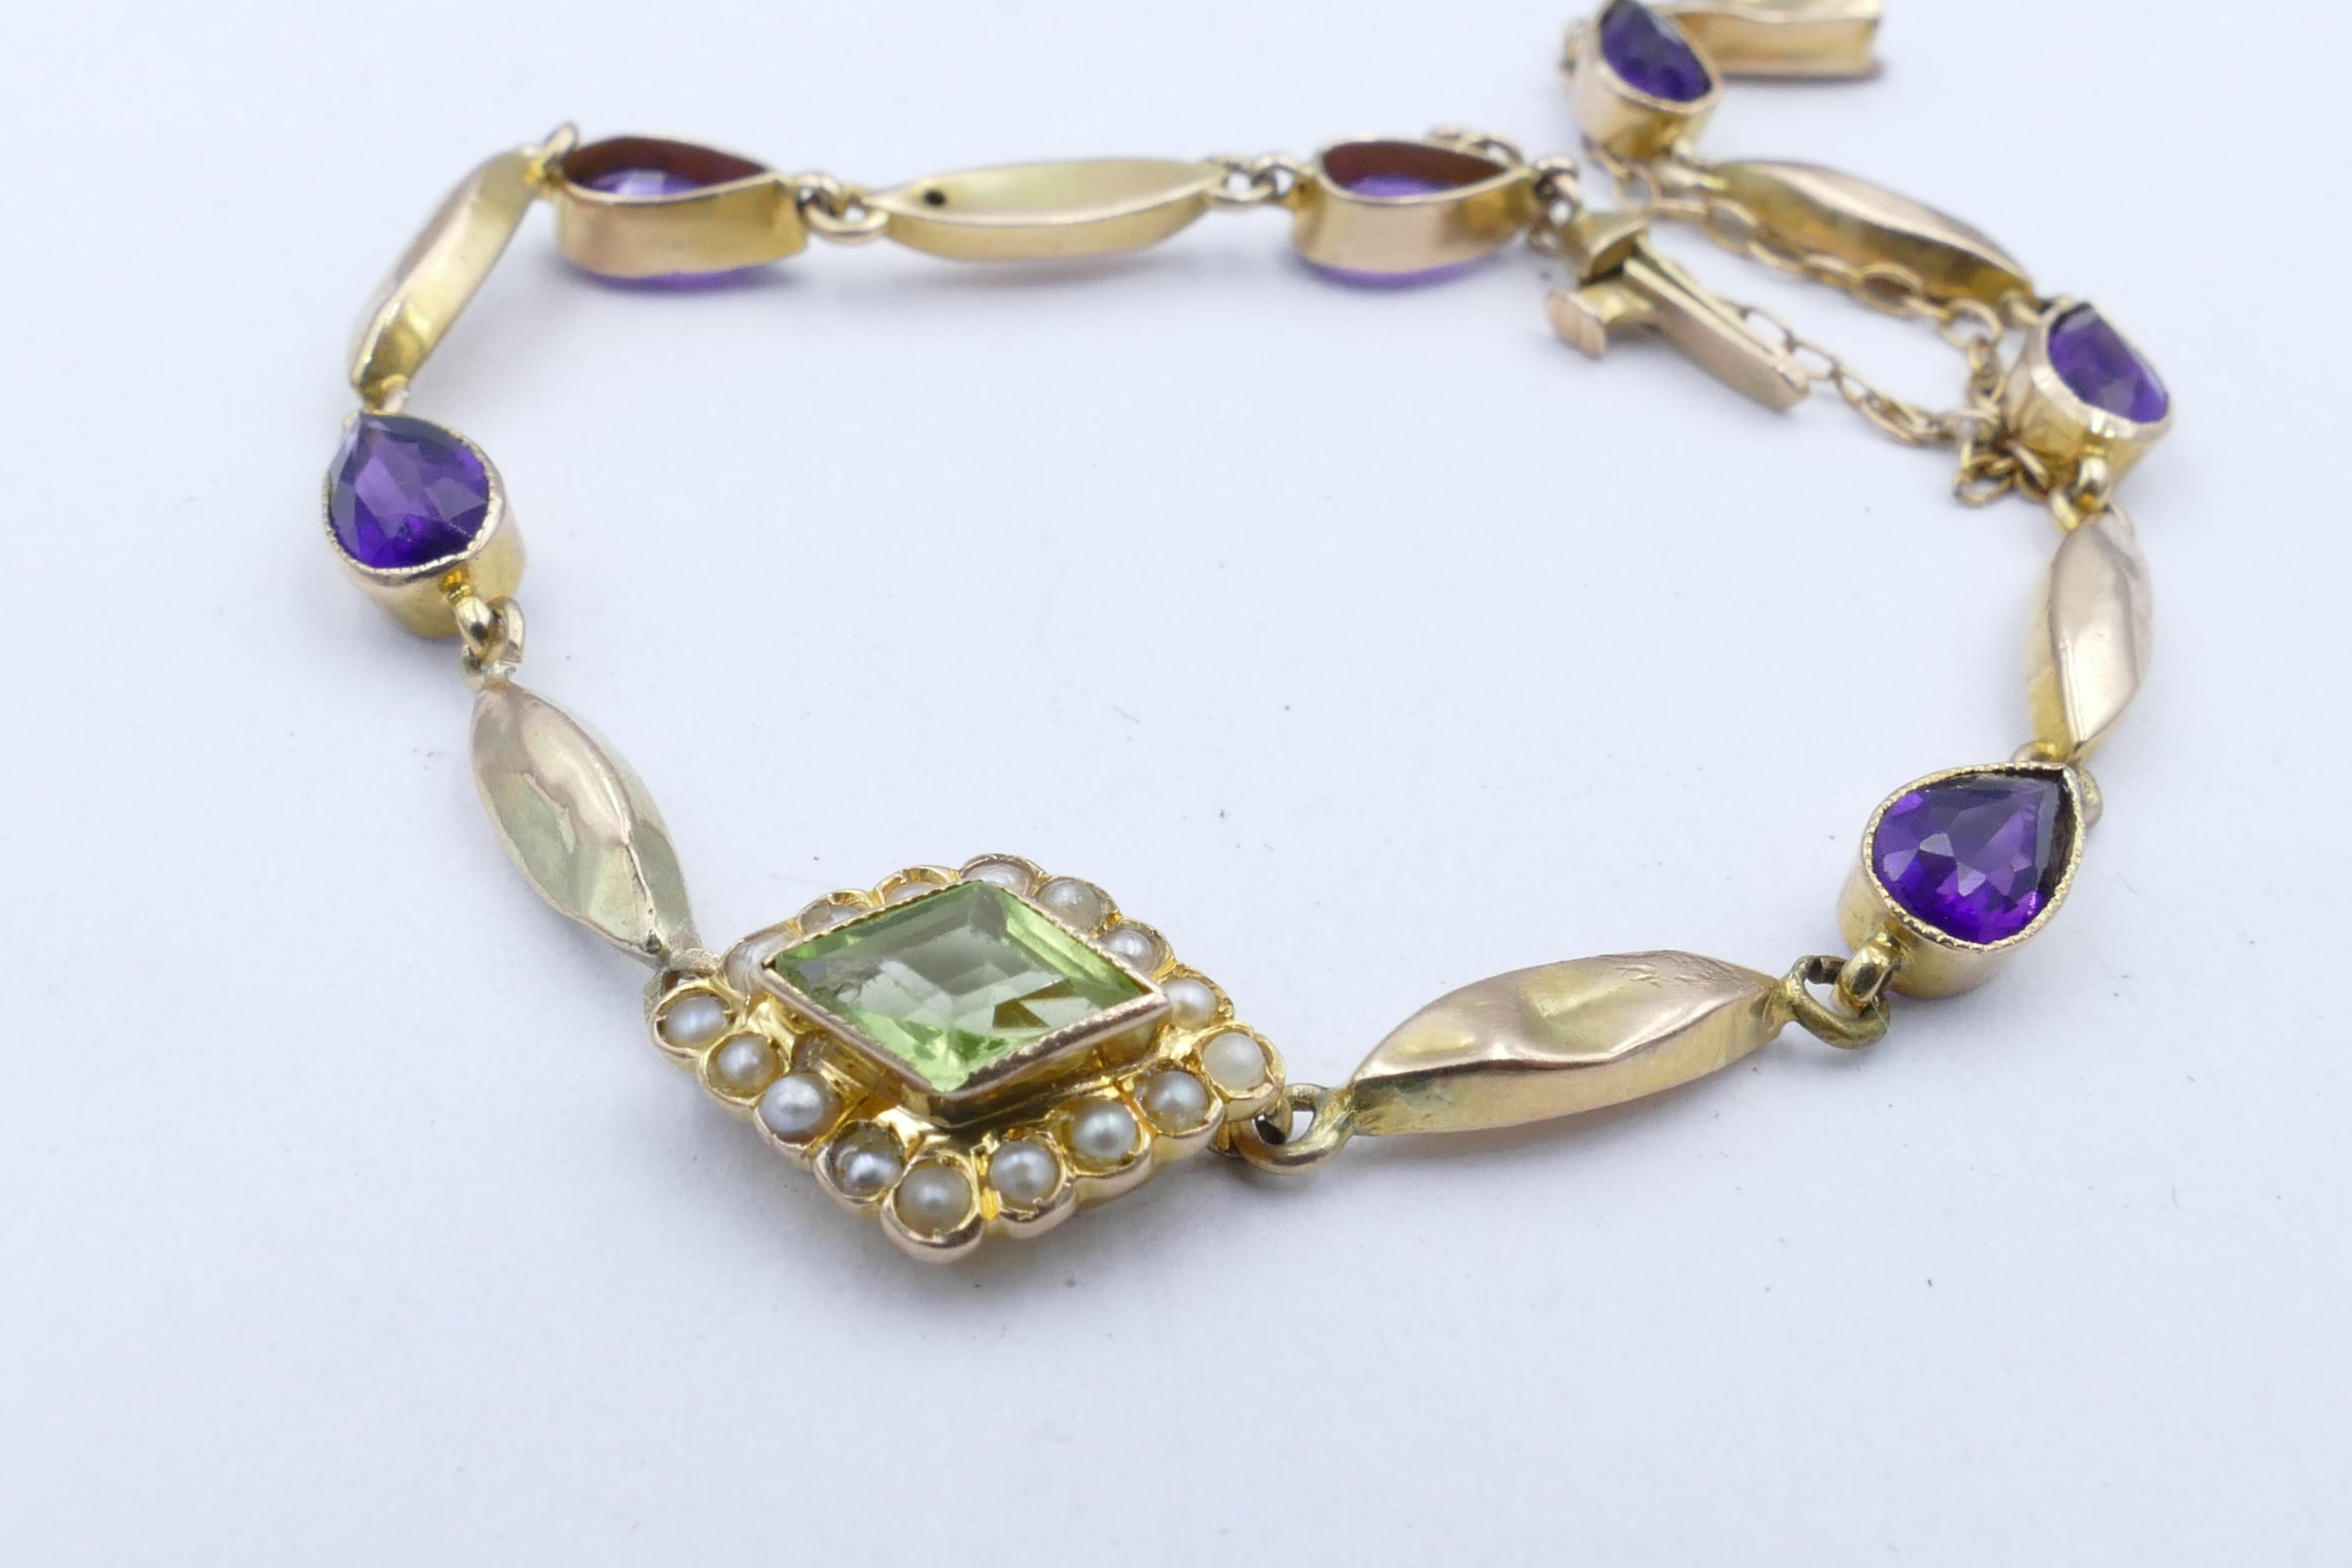 This is such a sweet Bracelet depicting the colours - Purple, White & Green - of the Edwardian Suffragette Movement.
It features 6 Pear cut Amethysts of a deep violet colour. ! X kite cut lightish Peridot as the Centrepiece along with 16 Seed